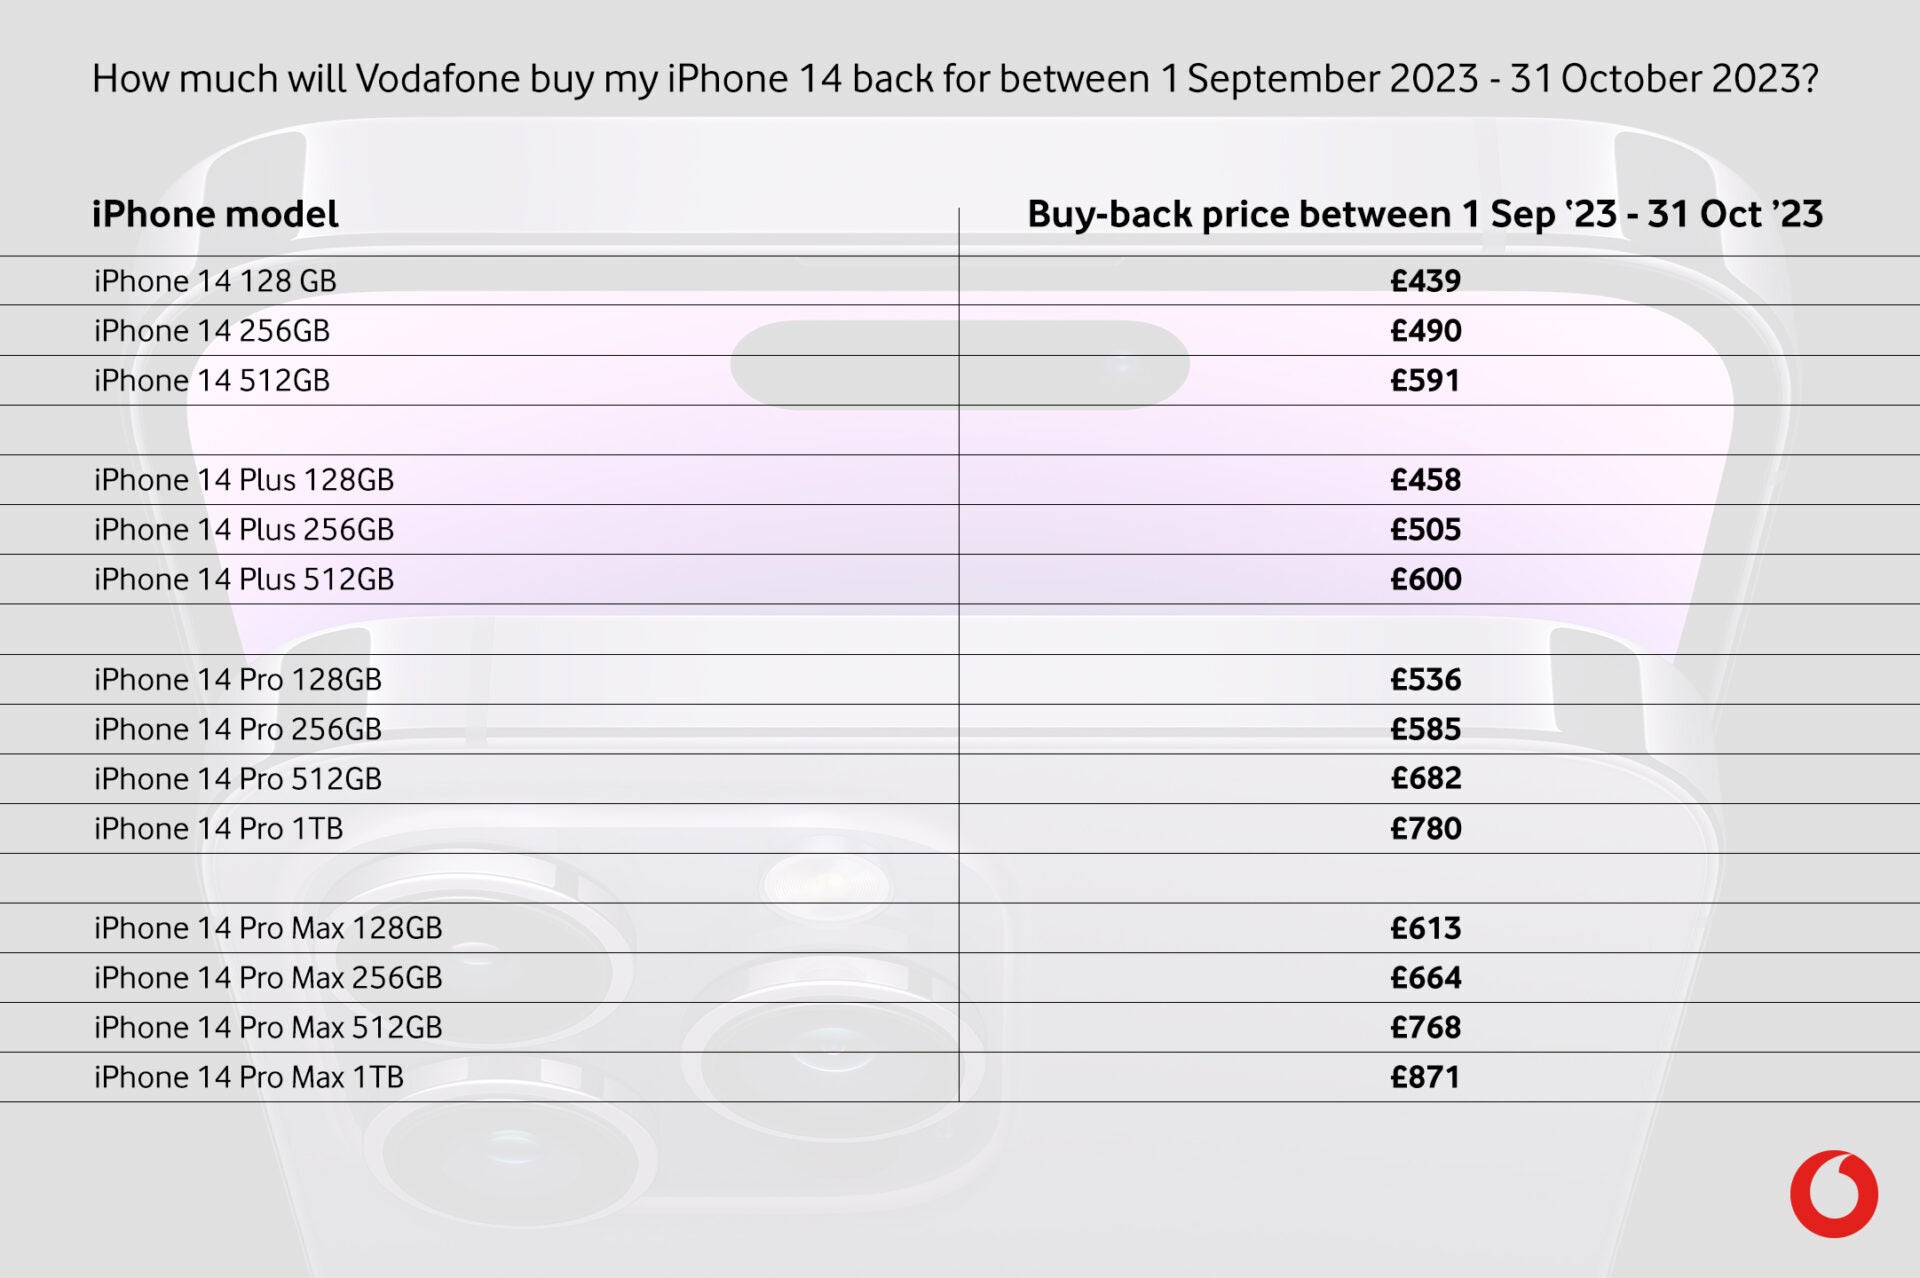 UK carrier Vodafone now offers the iPhone 14 with a Phone Buy-Back Guarantee service